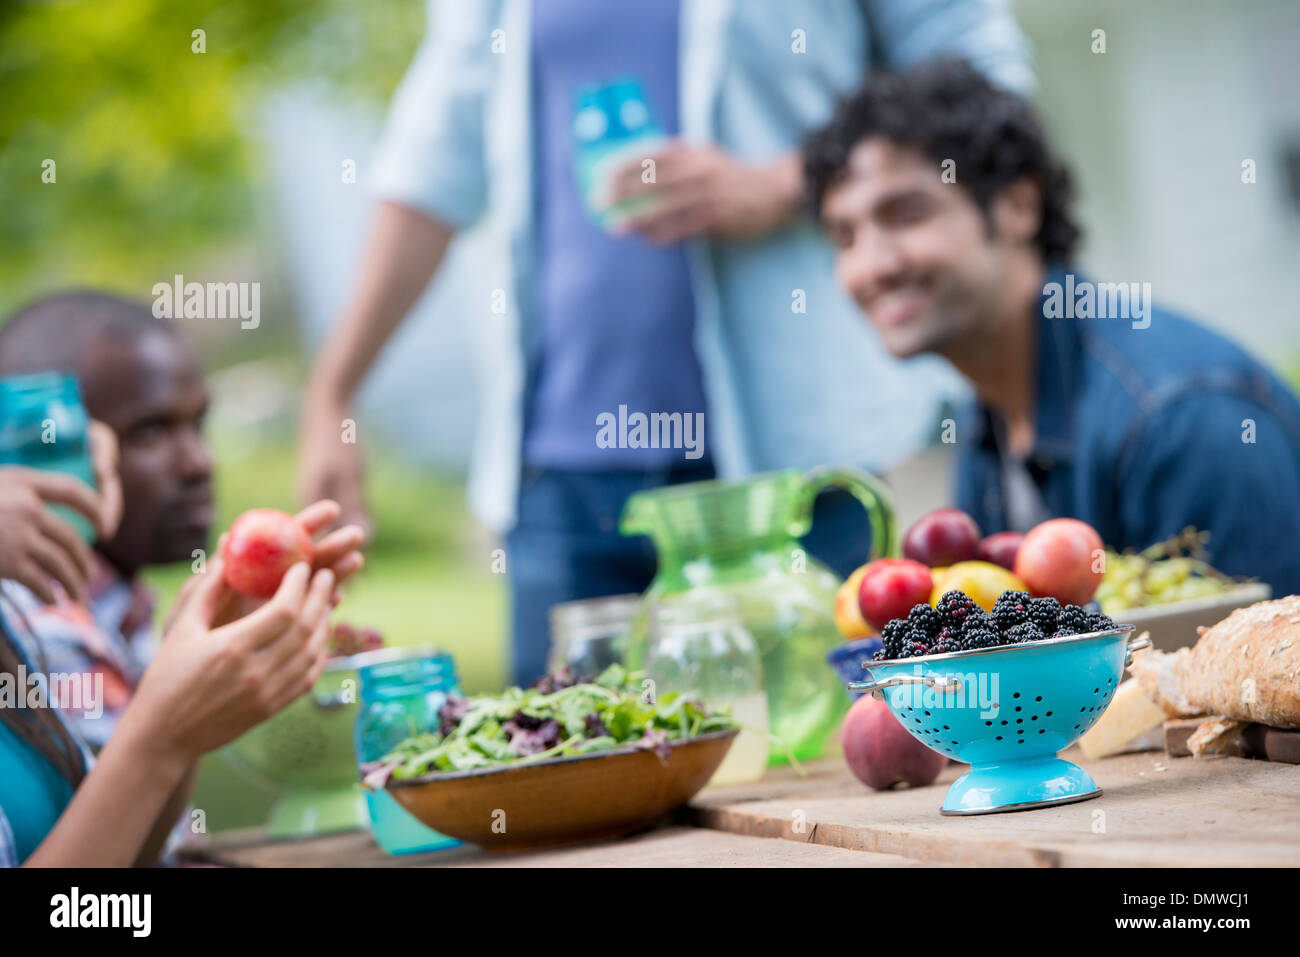 A summer party outdoors. A group of friends at a table. Stock Photo